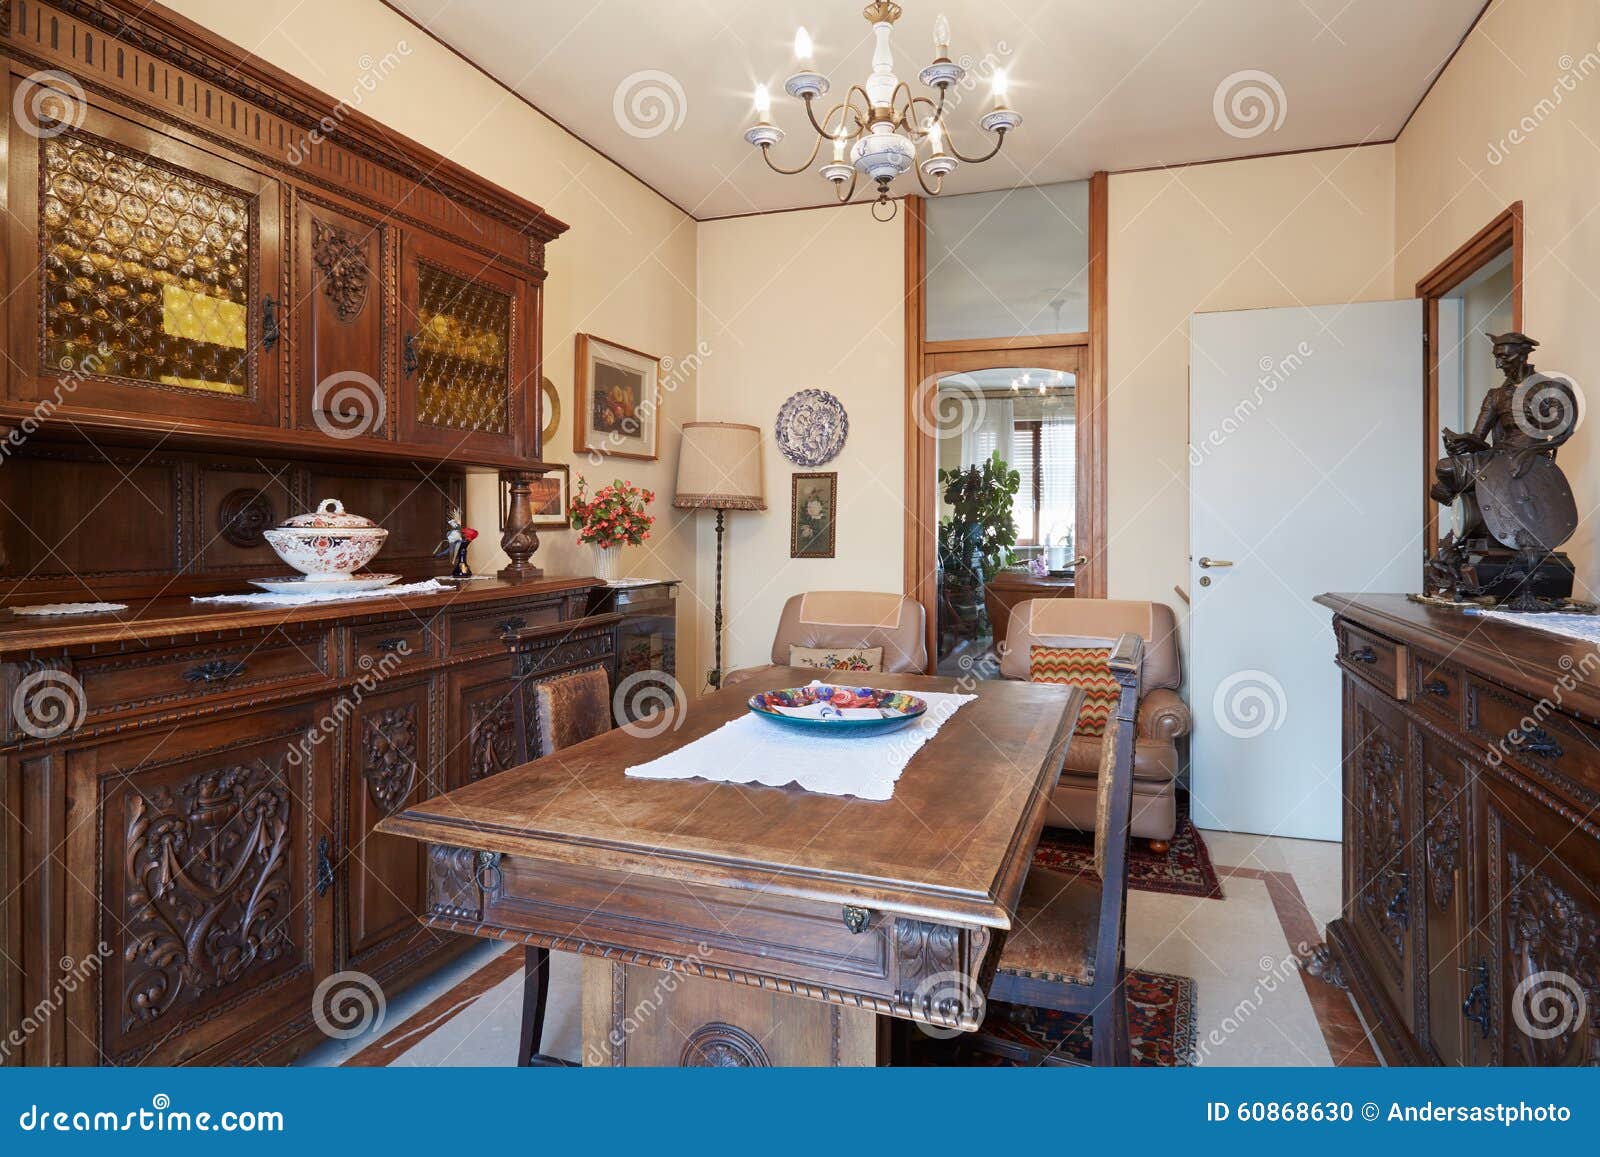 dining room with antiquities interior